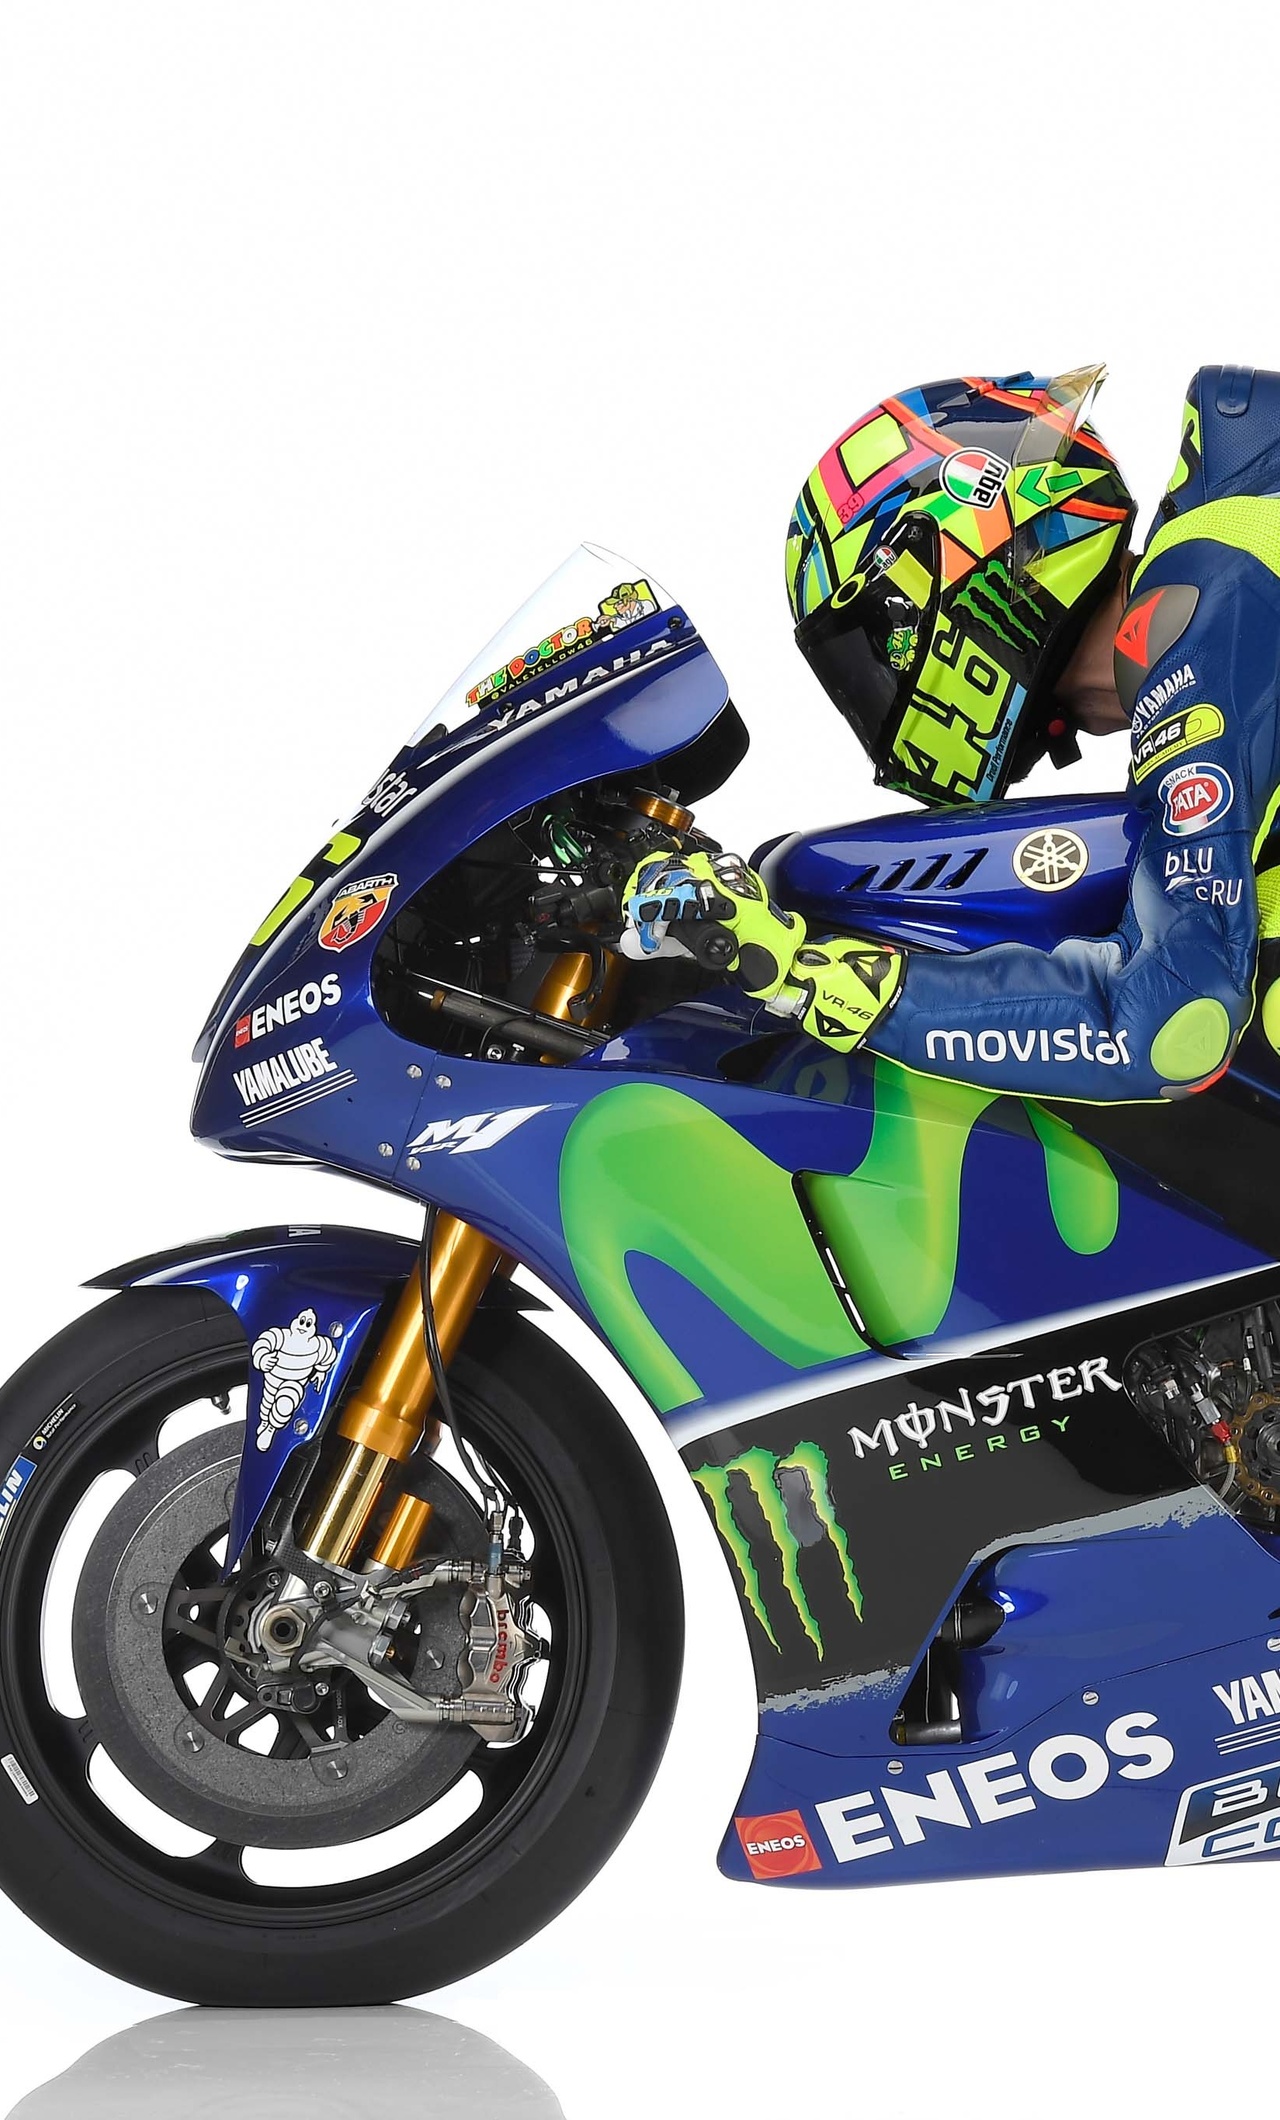 1280x21 Motogp Valentino Rossi Yamaha Yzr M1 Iphone 6 Hd 4k Wallpapers Images Backgrounds Photos And Pictures